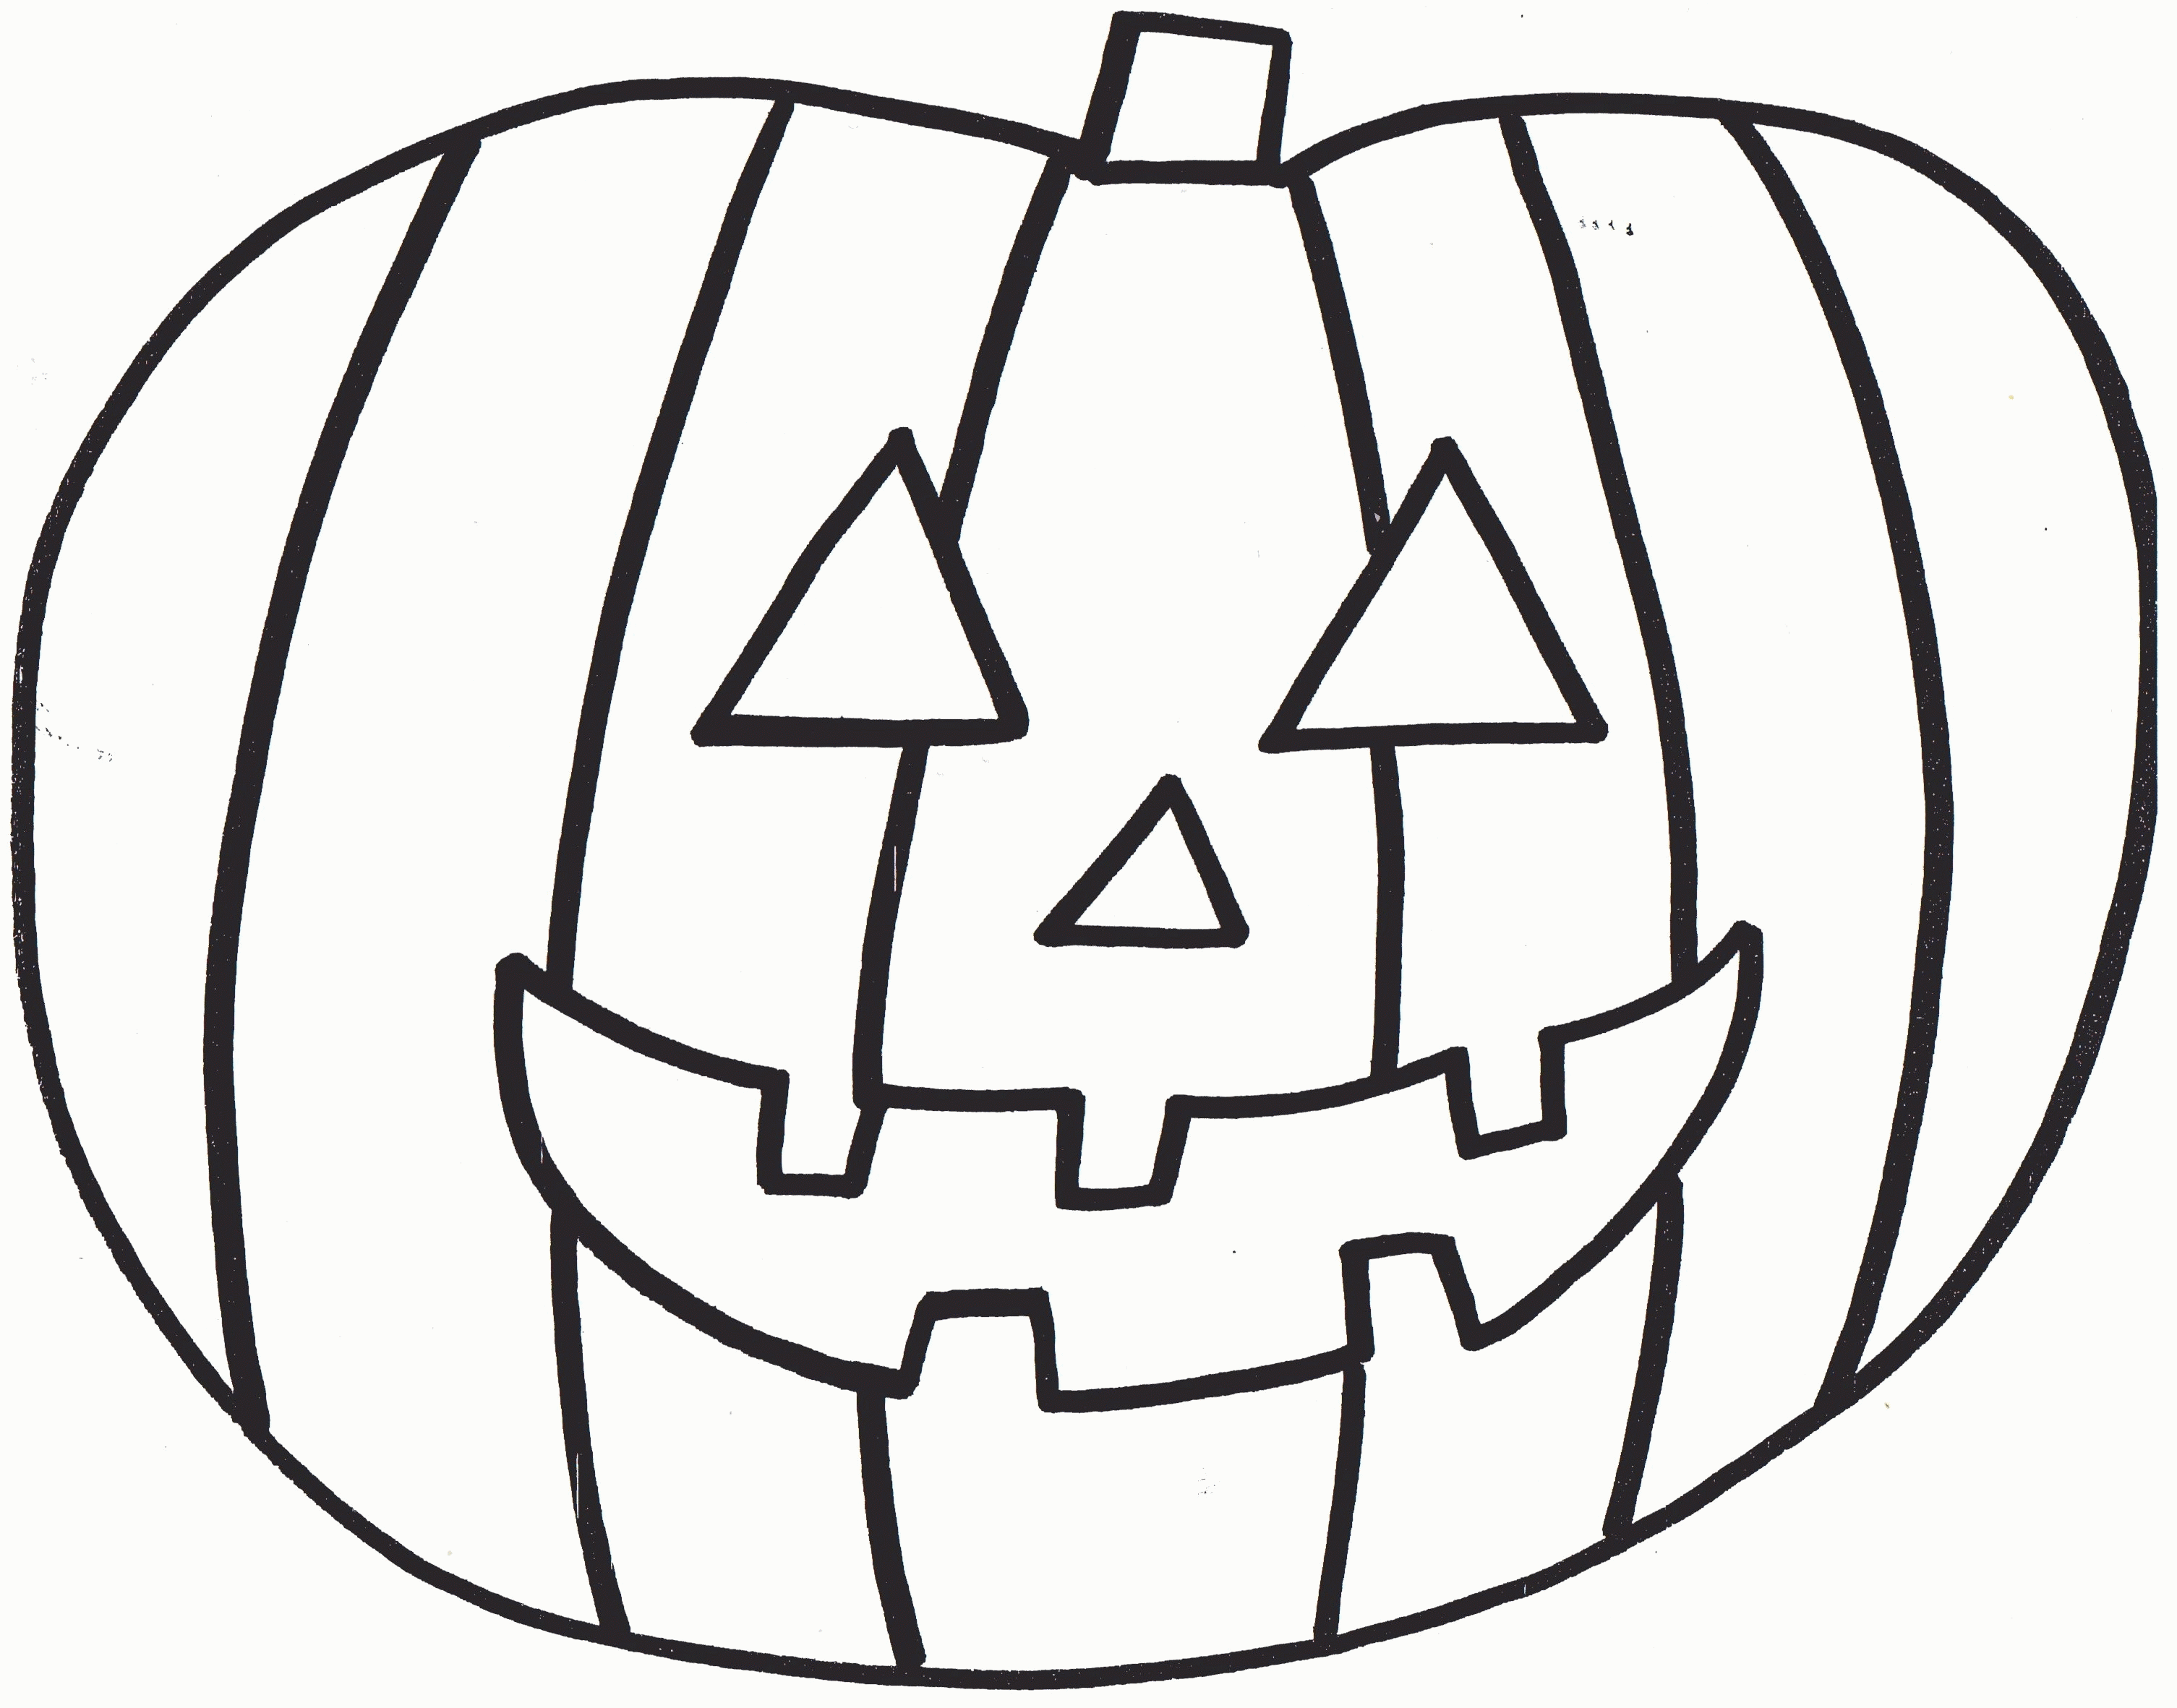 Smile Pumpkin Coloring Pages| Coloring Pages for Kids #Xi